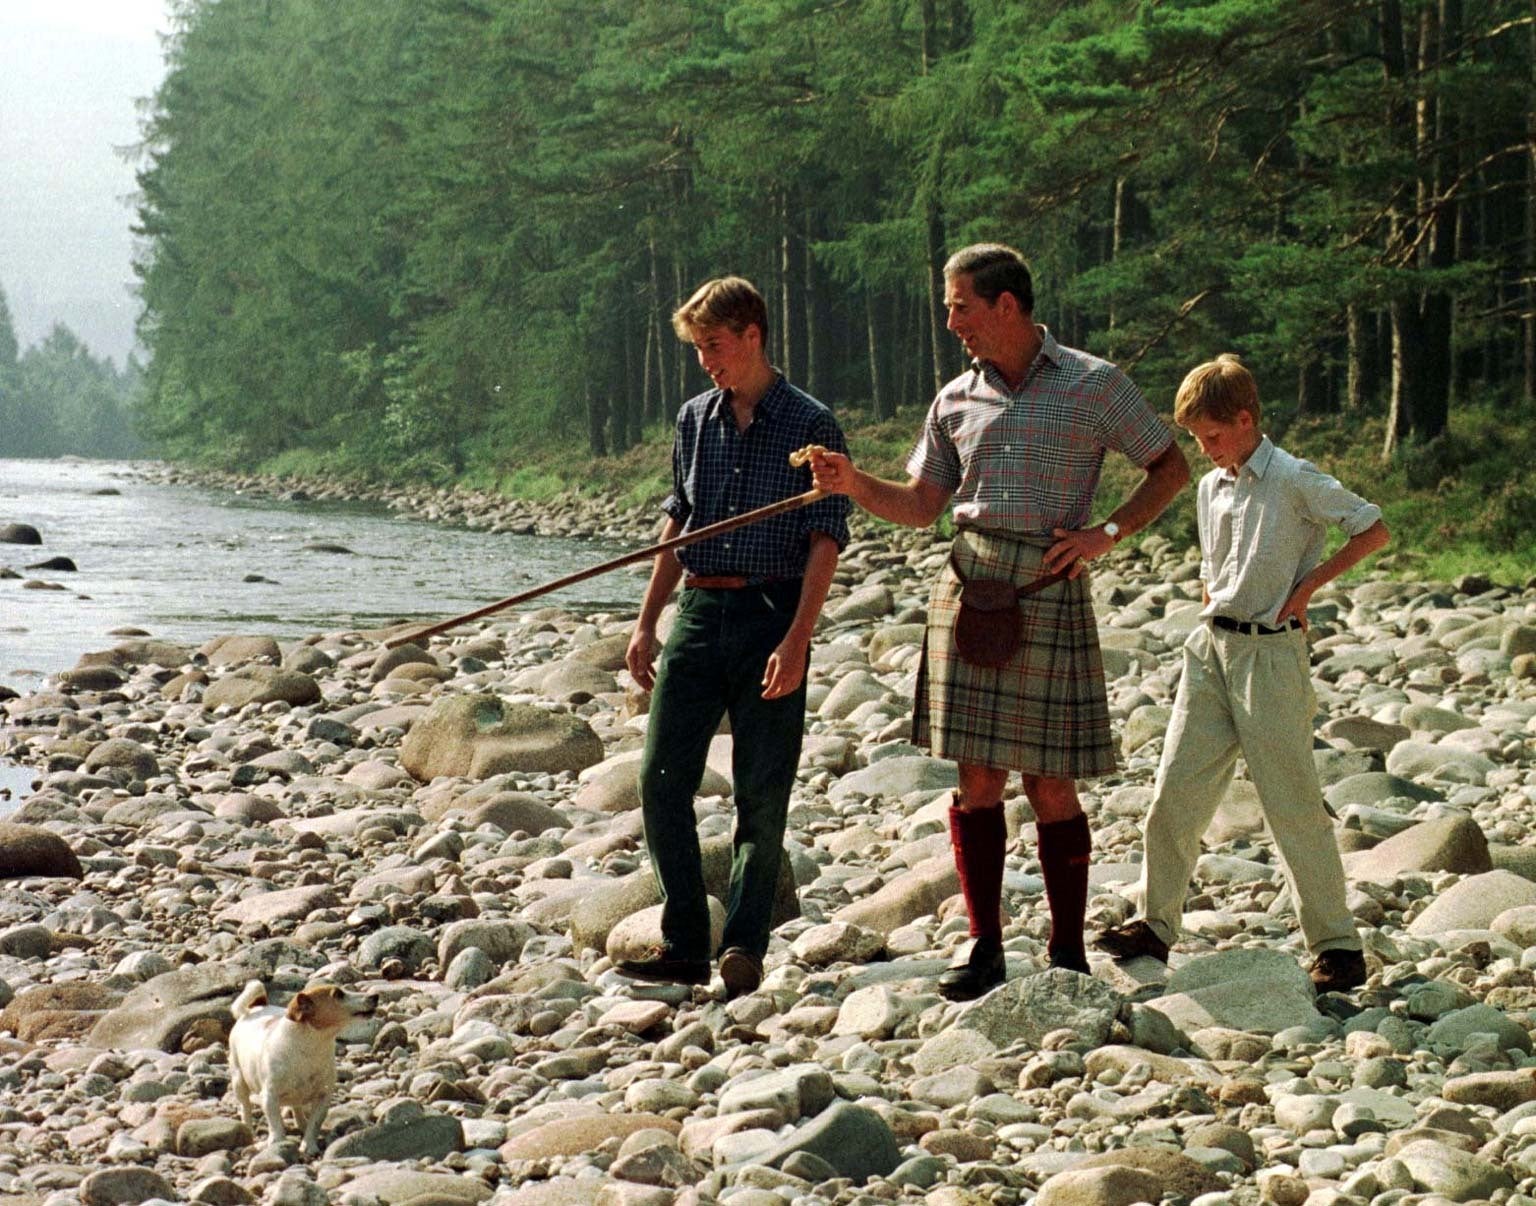 The Prince of Wales and his sons William, 15, and Harry, 12, take an early morning walk along the banks of the River Dee on the Balmoral estate in 1997 (Chris Bacon/PA)